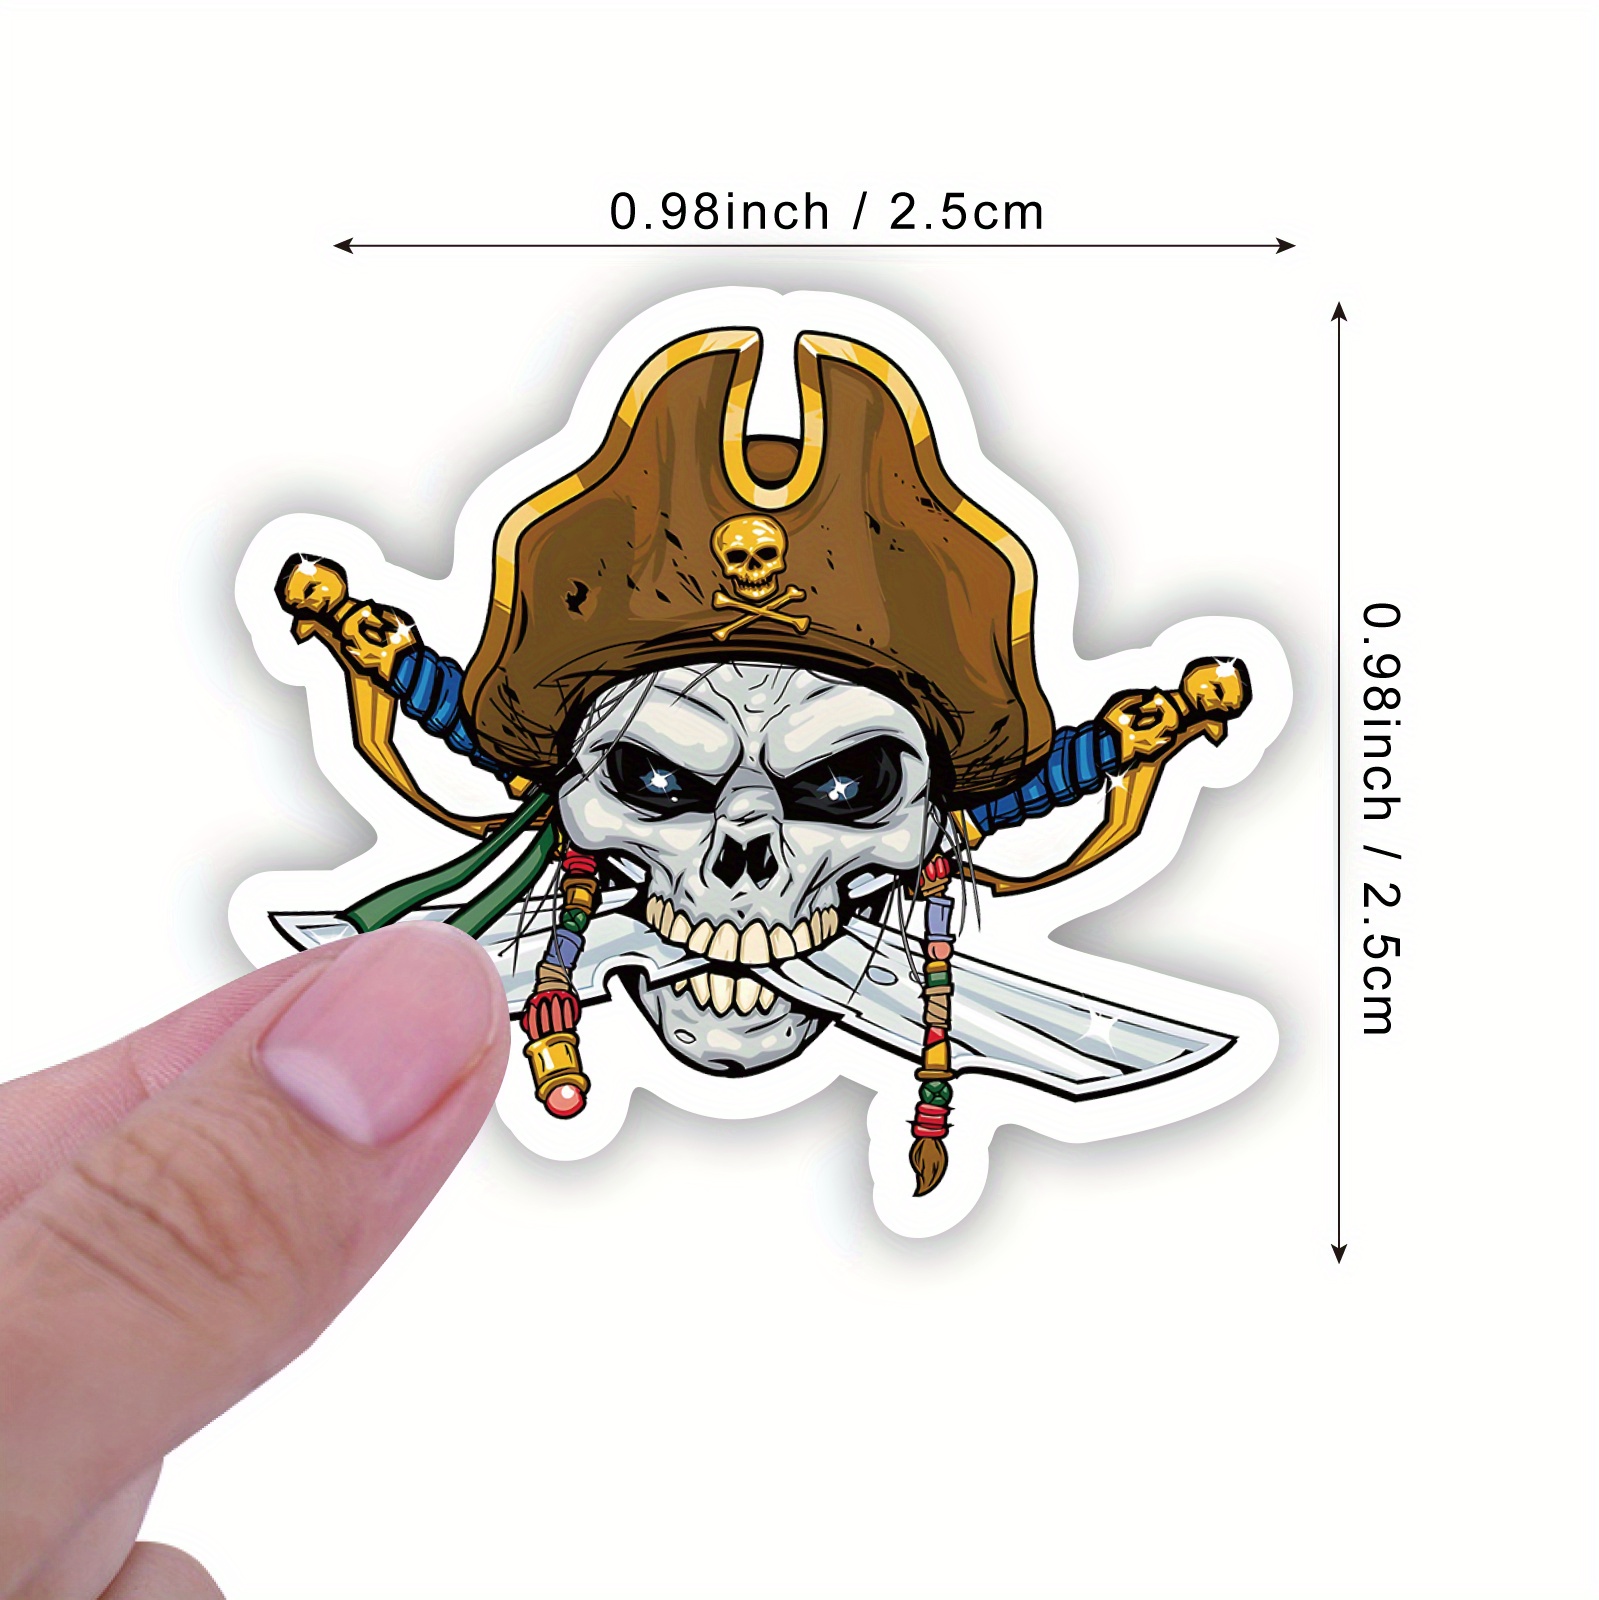 50pcs Pirate Stickers for Kids Teens Adults, Funny Pirate Crossbones Stickers, Cartoon Pirate Party Decorations Stickers for Laptops Water Bottles